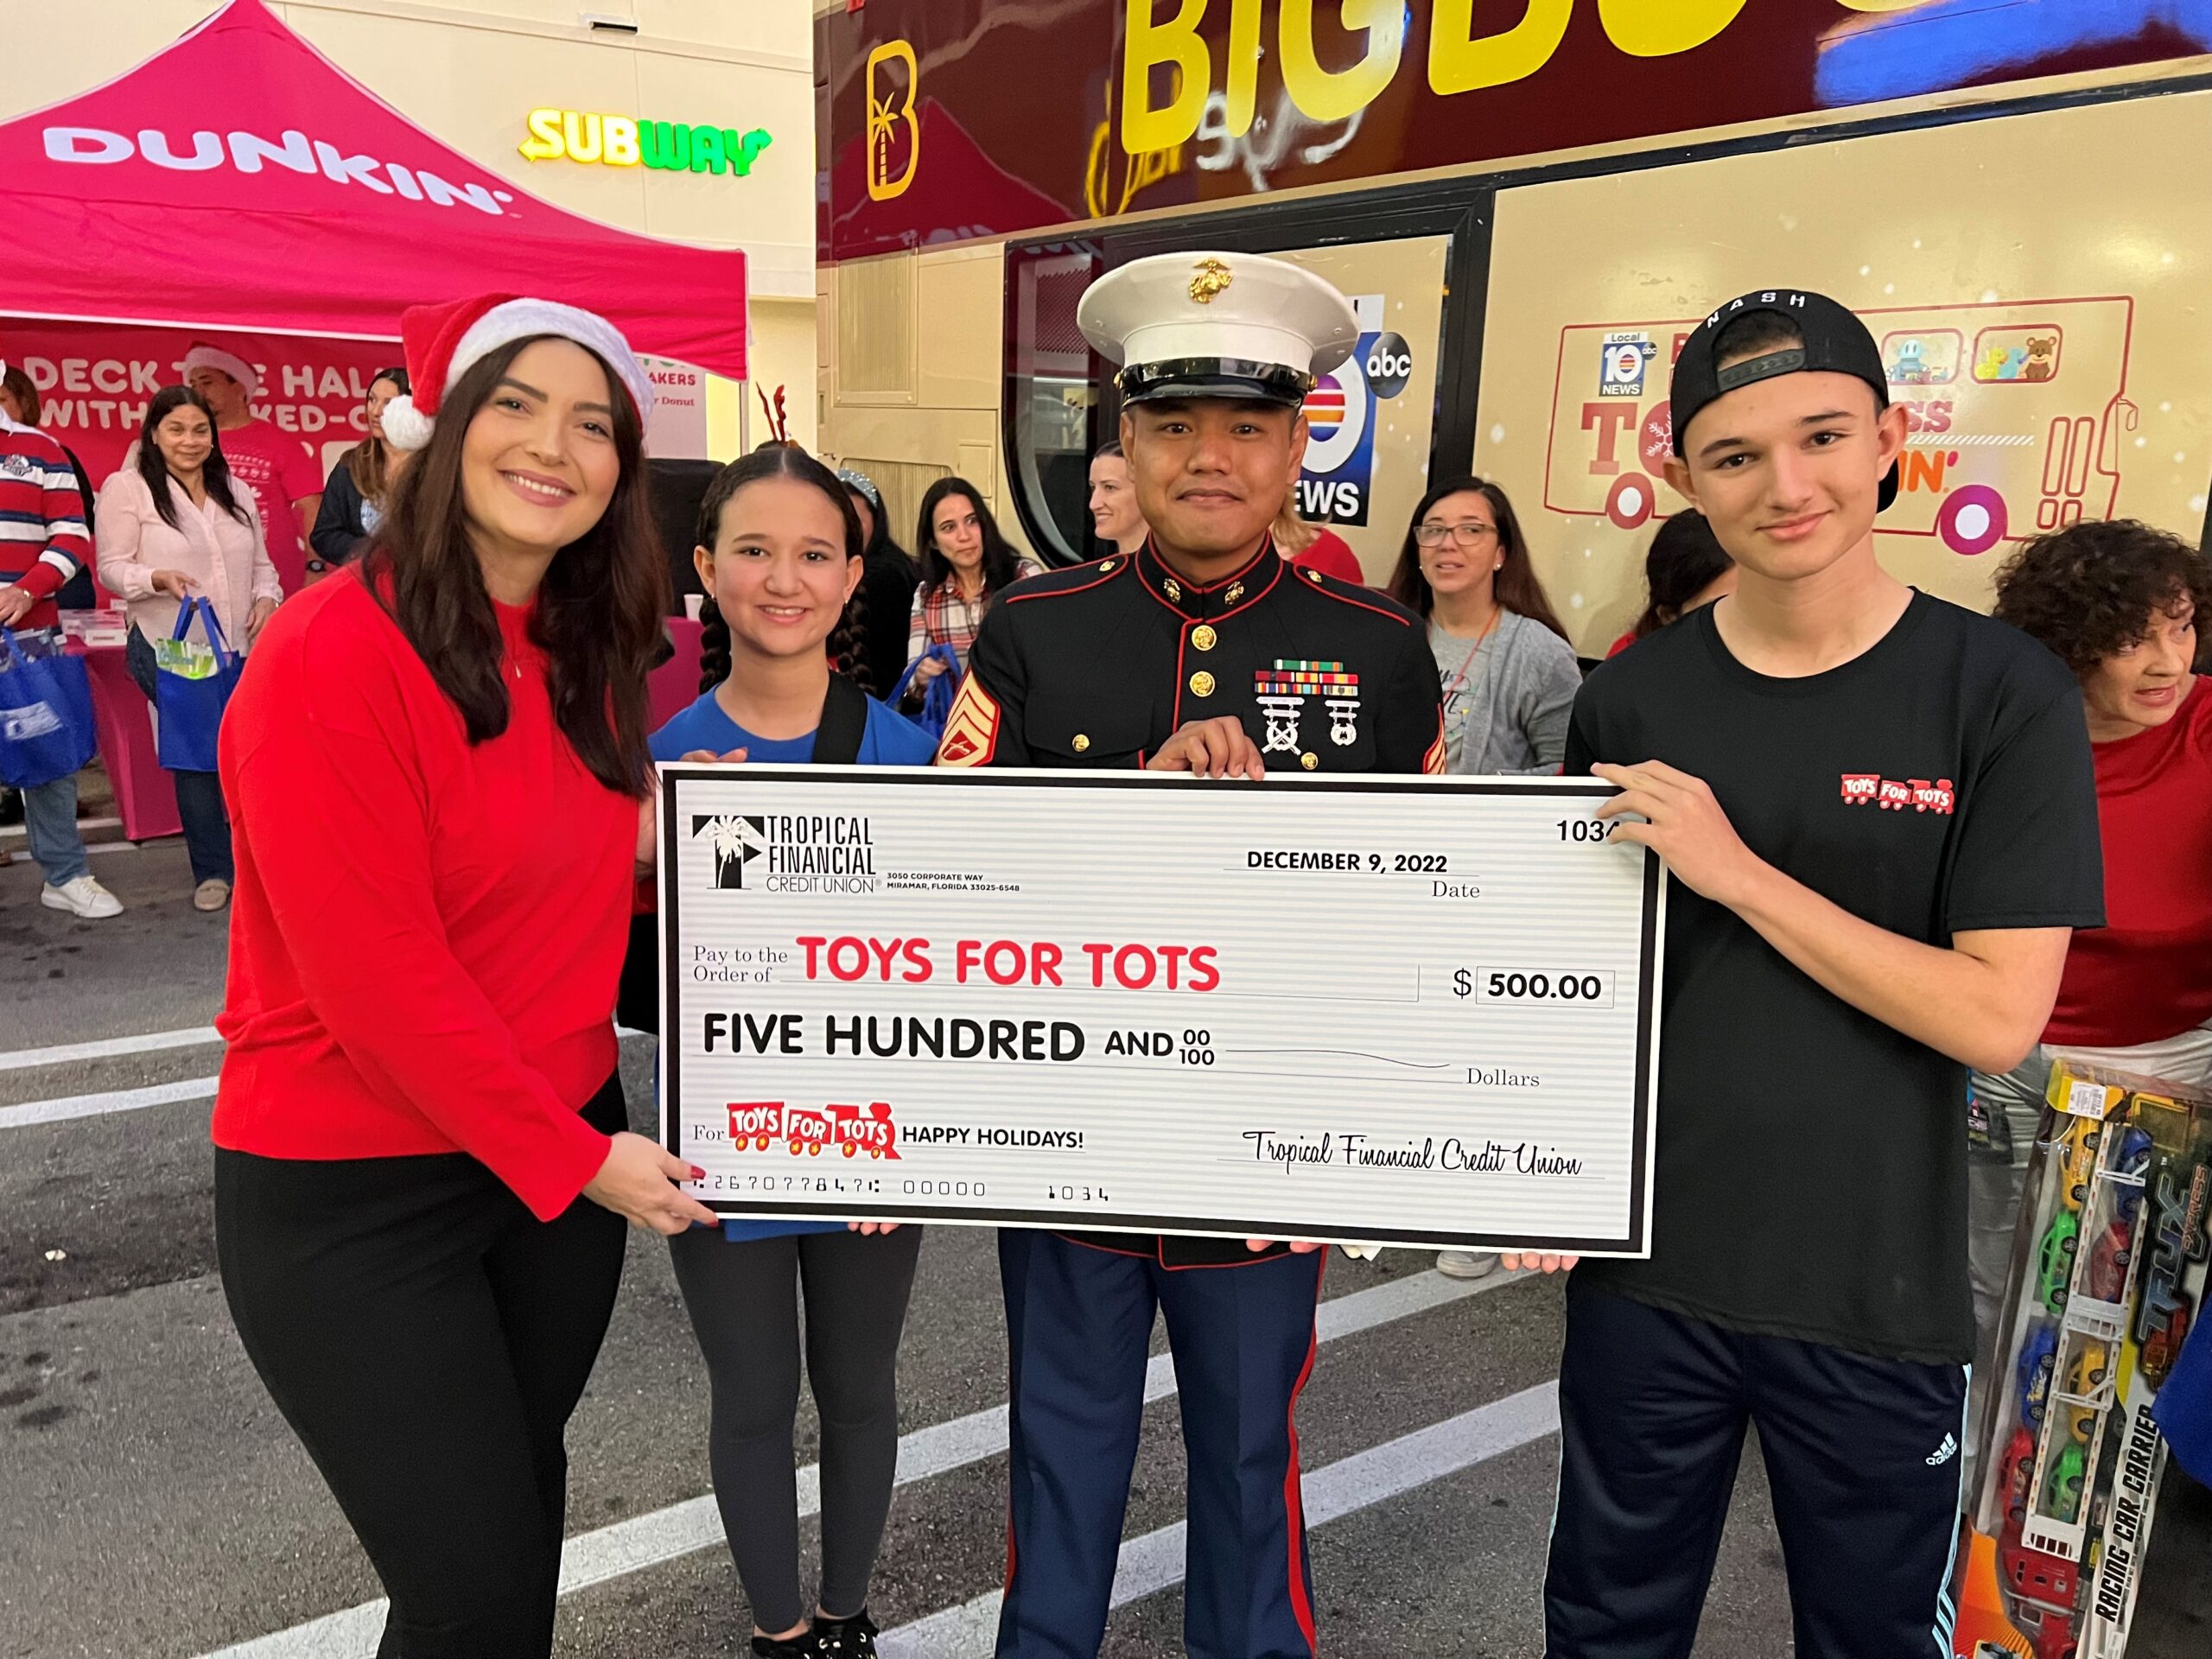 Tropical Financial Donates $1,000 to Toys for Tots